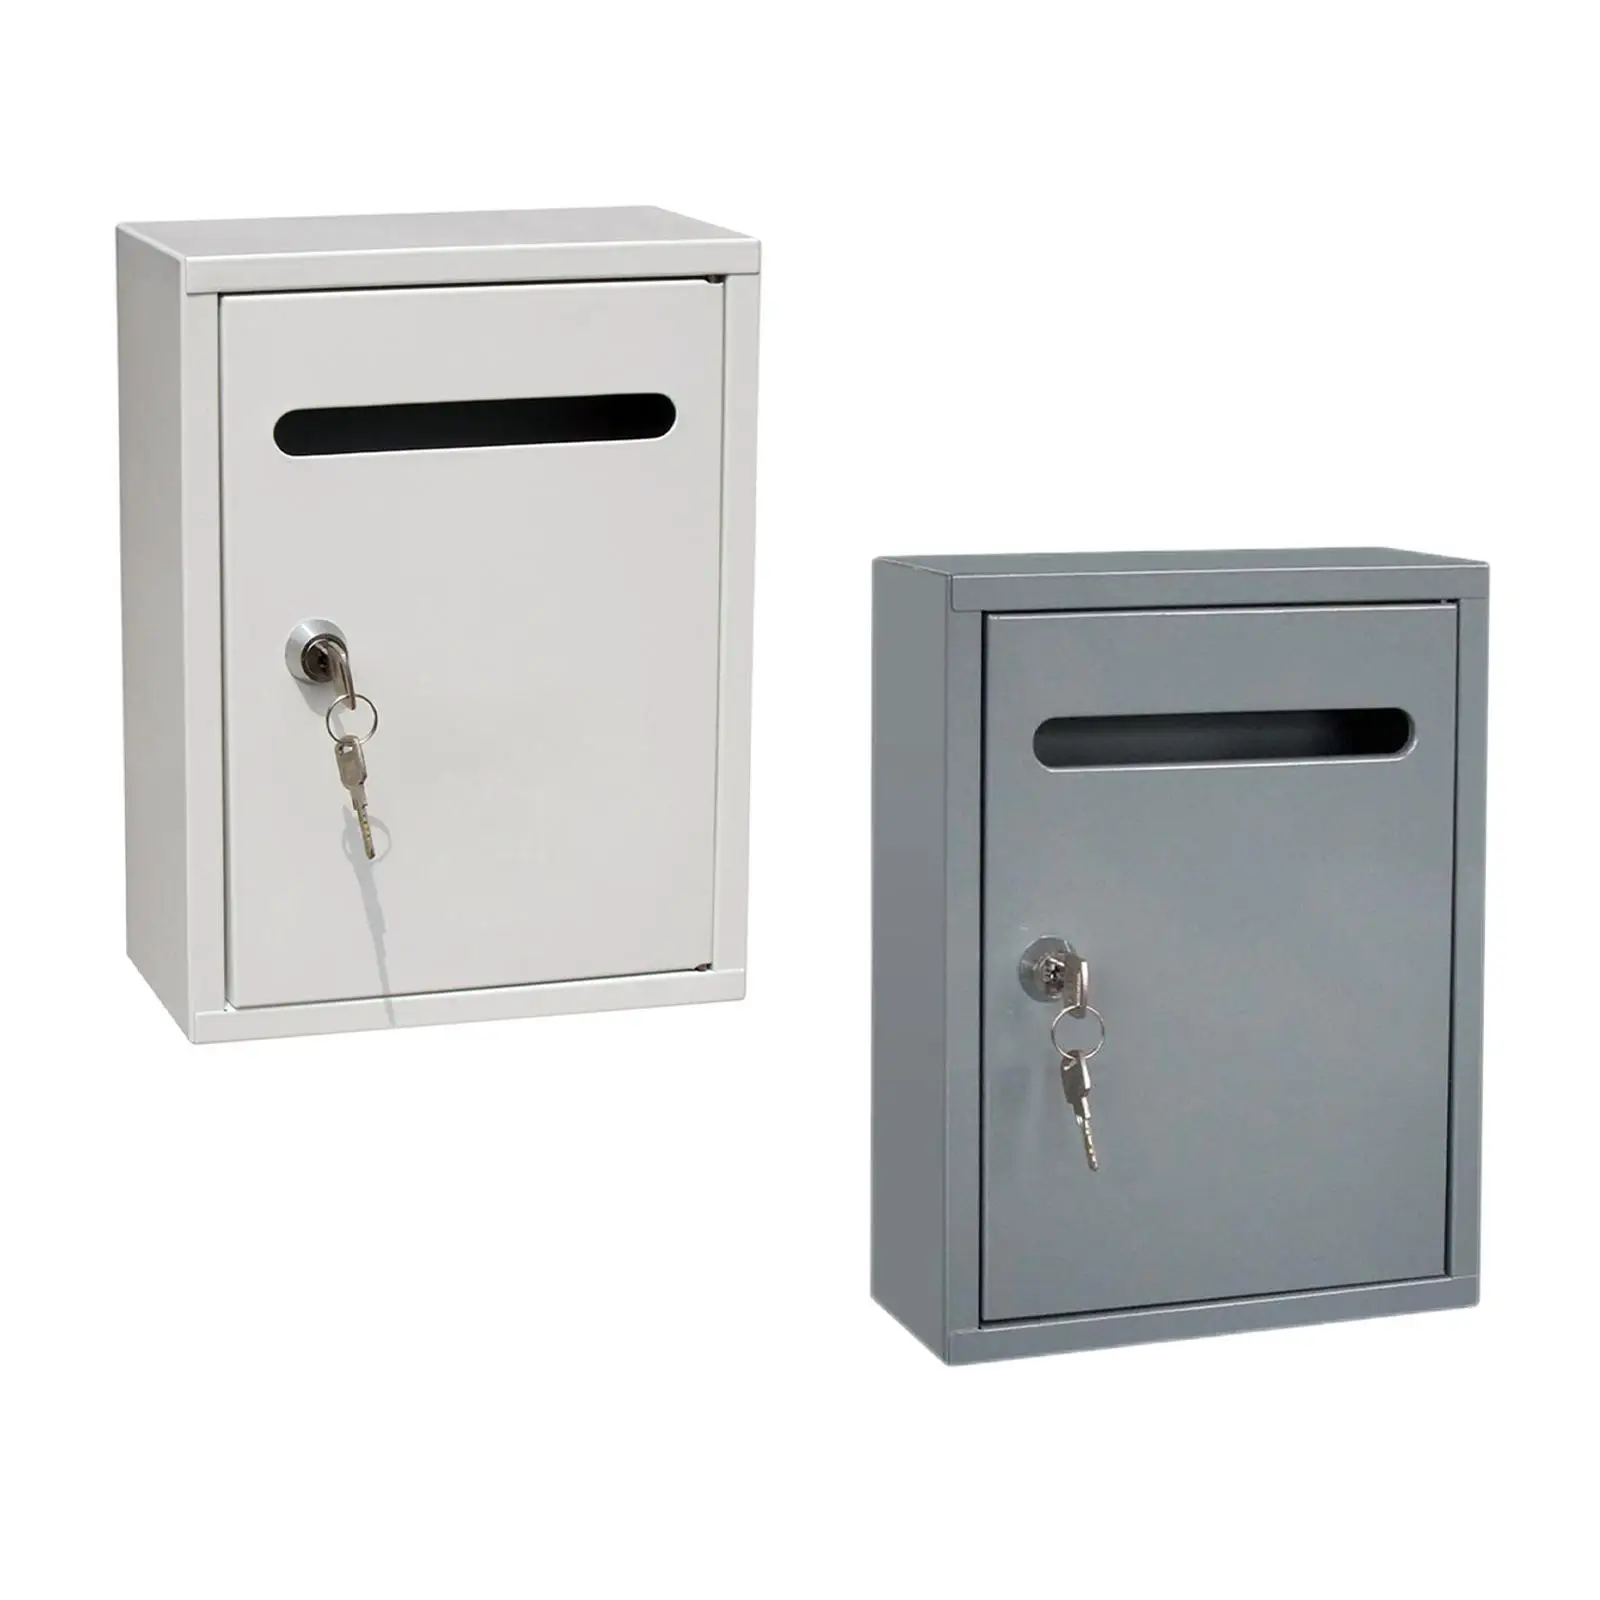 Mailbox Key Lock Wall Mount Drop Box with 2 Keys Secured Safe Suggestion Box Collection Boxes Letterbox Mail Box